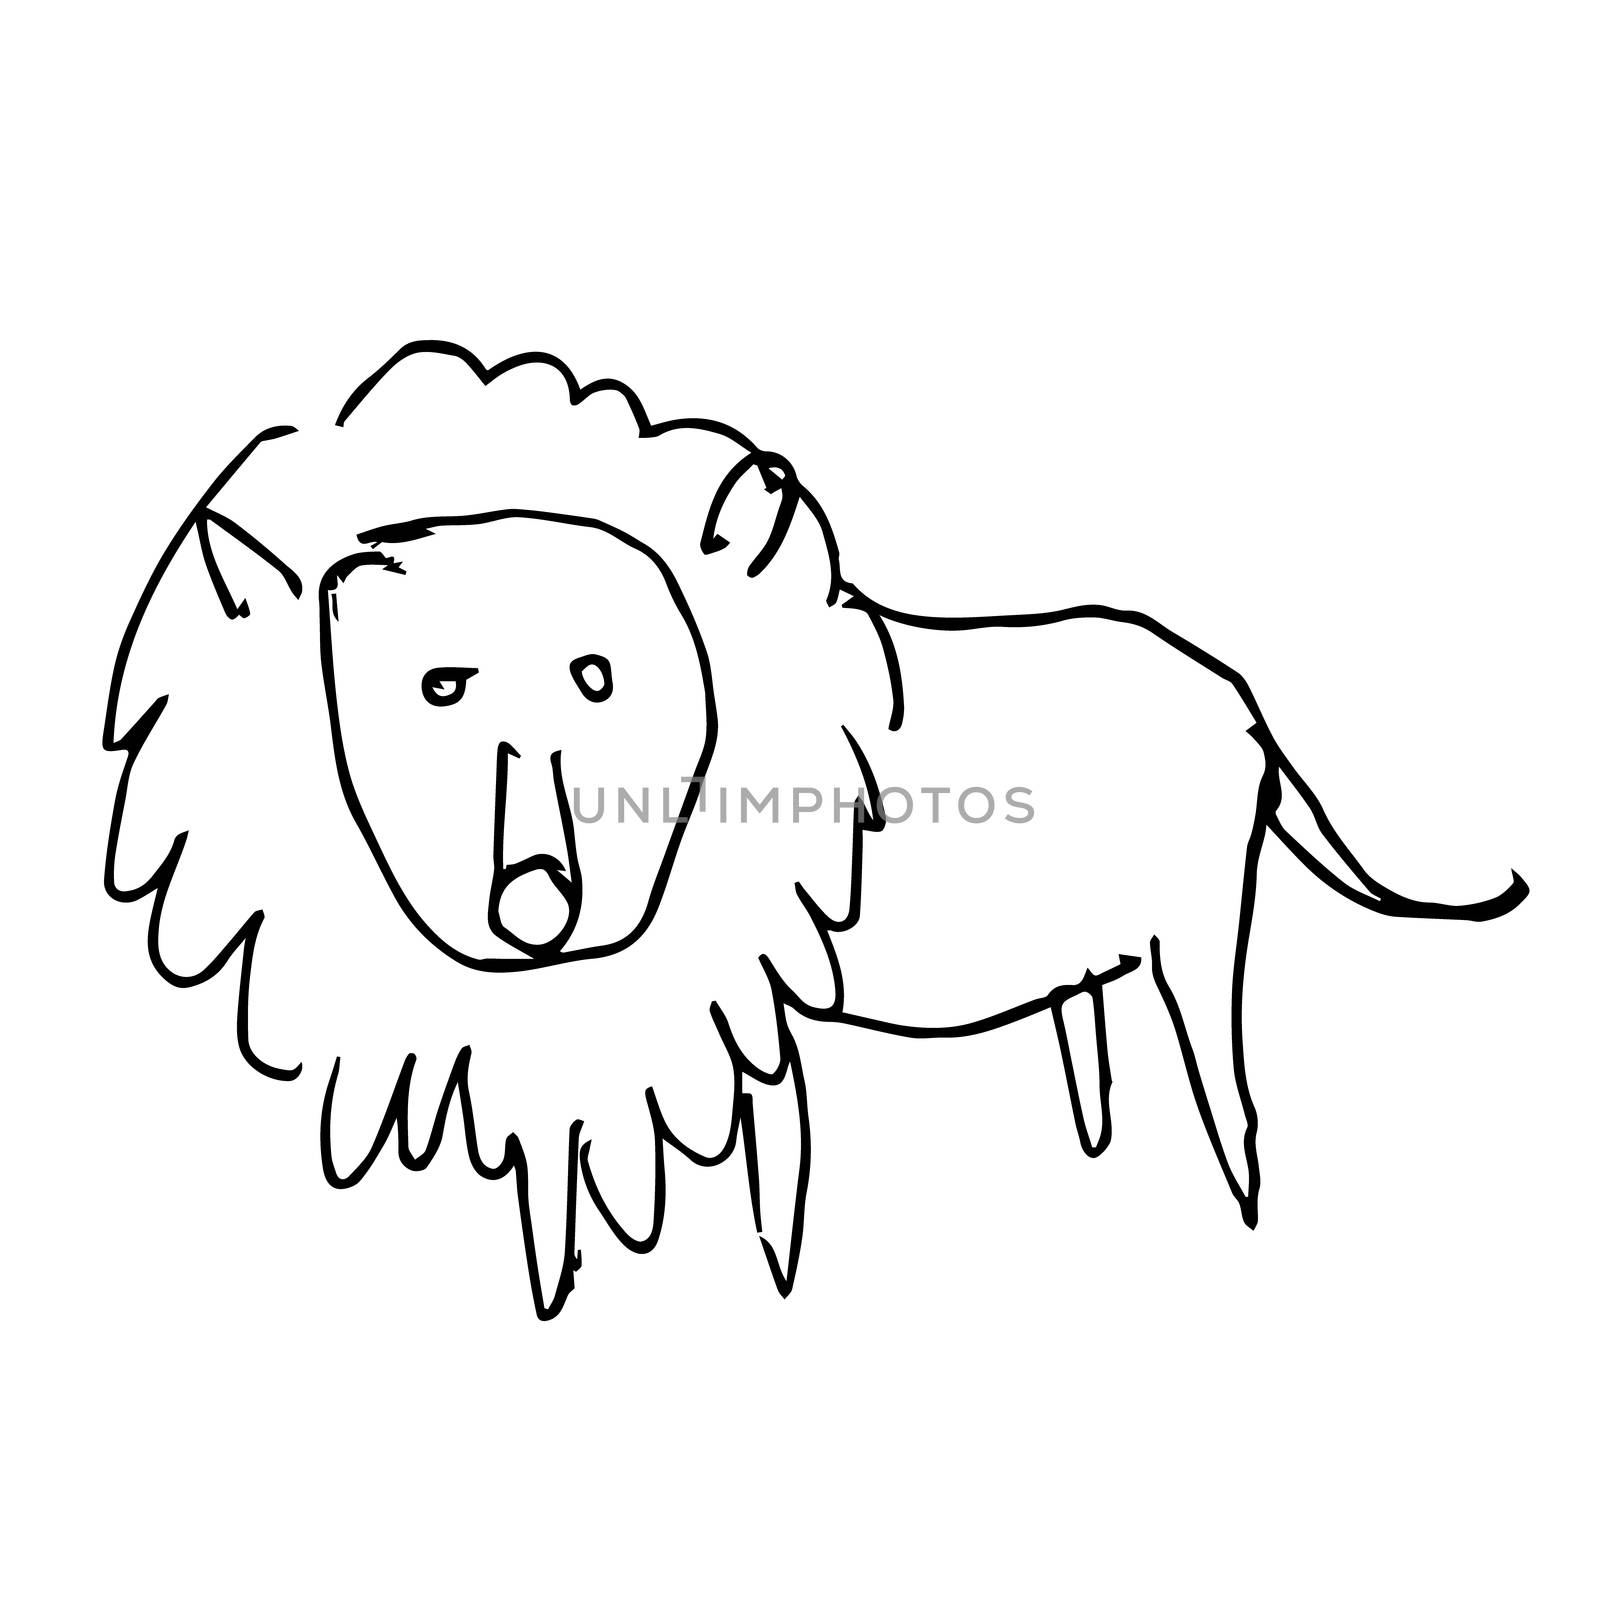 freehand sketch illustration of lion doodle hand drawn in kid style